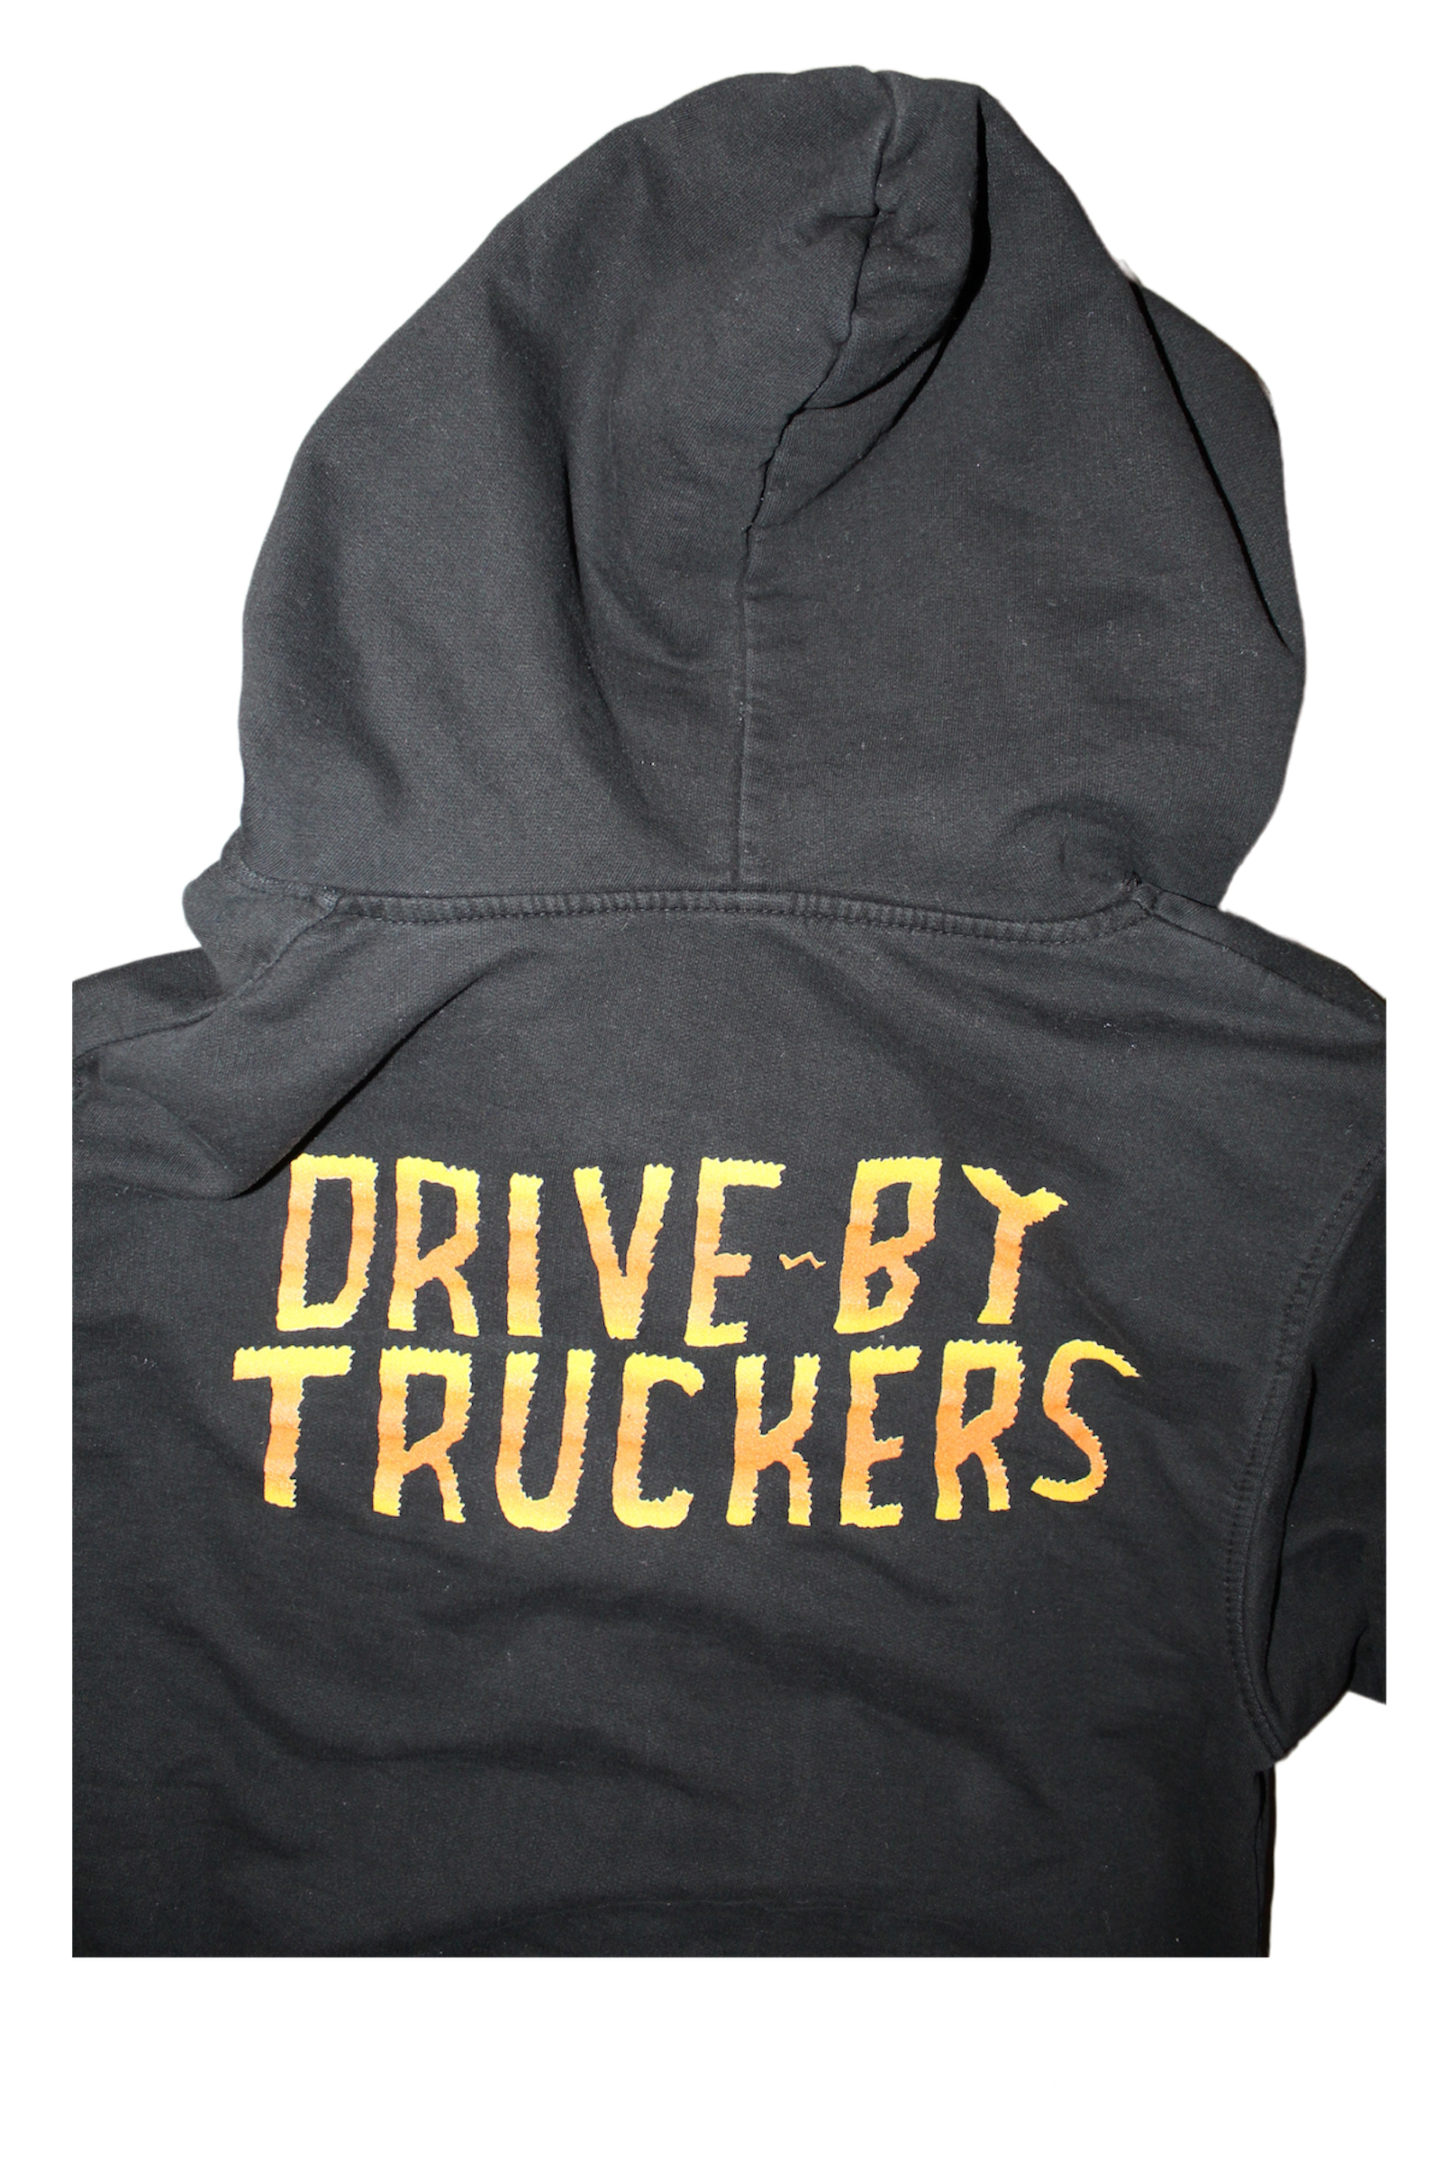 ‘Drive~By Truckers’ Zip Up